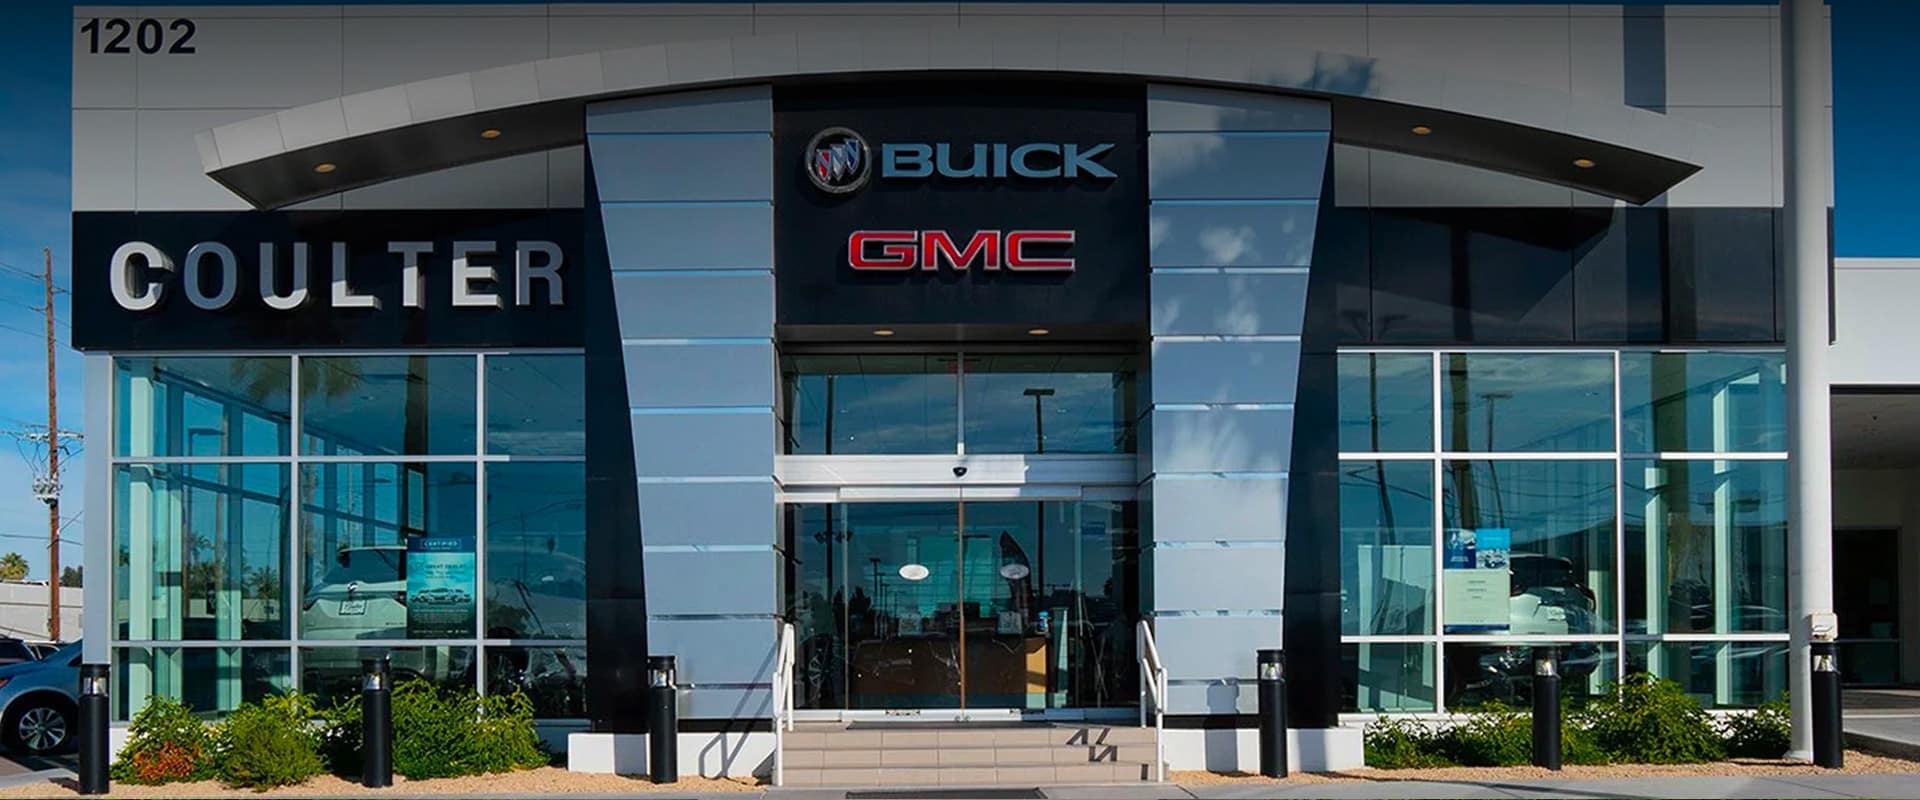 Coulter Buick GMC